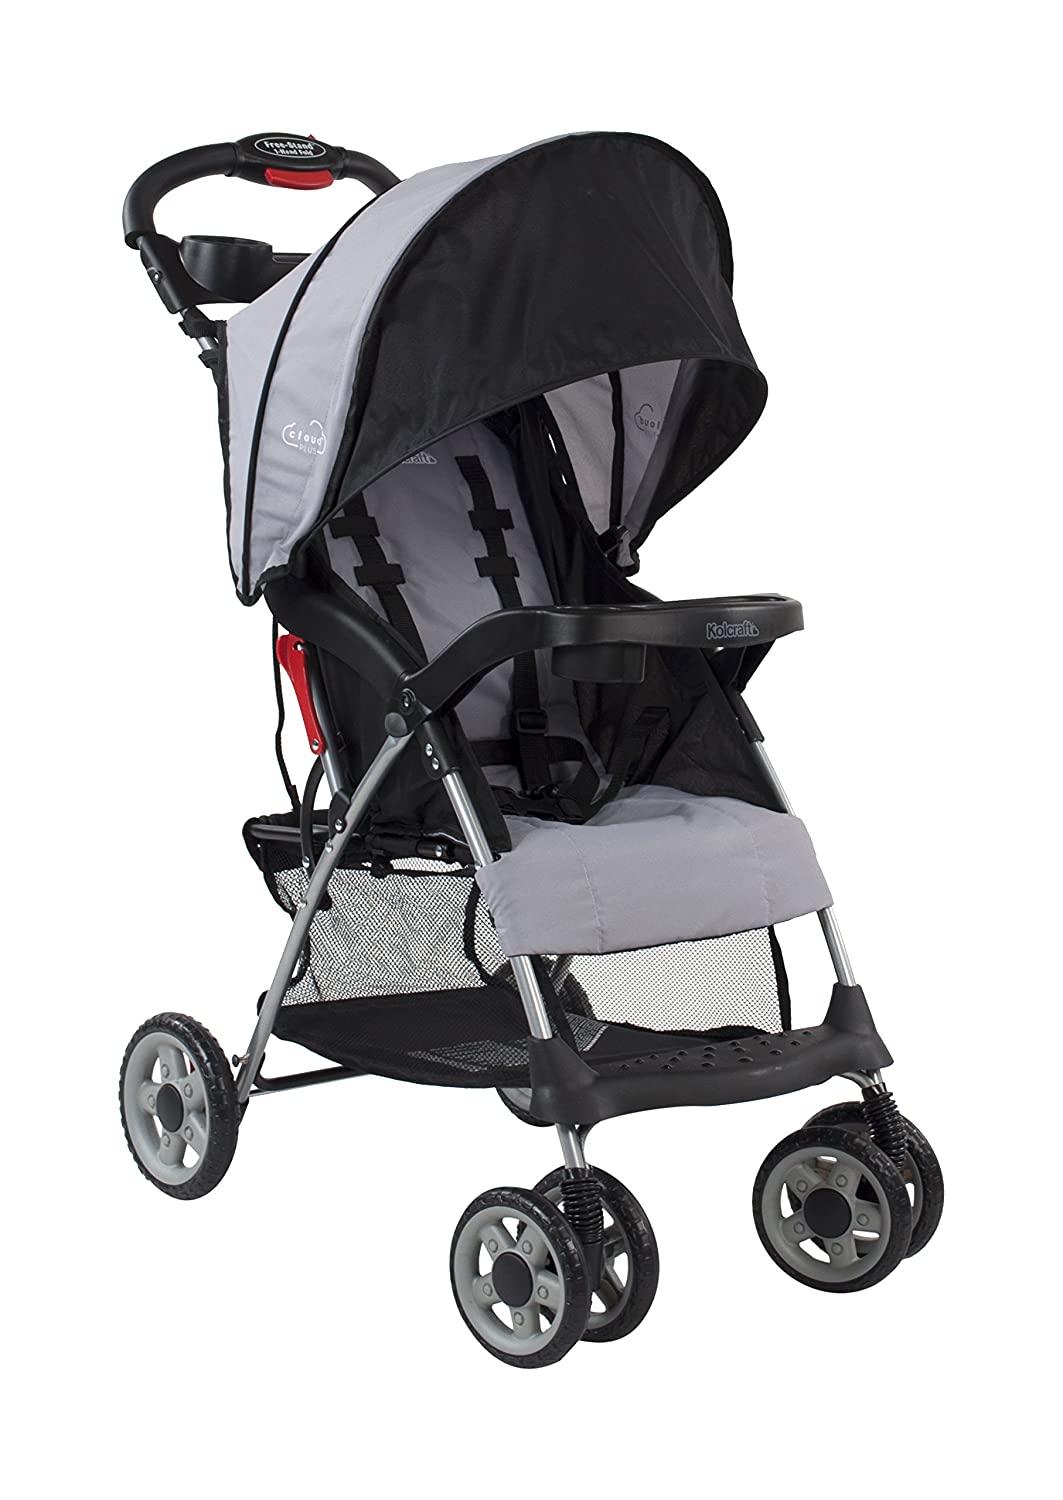 Review of Kolcraft Cloud Plus Lightweight Easy Fold Compact Travel Baby Stroller, Slate Grey